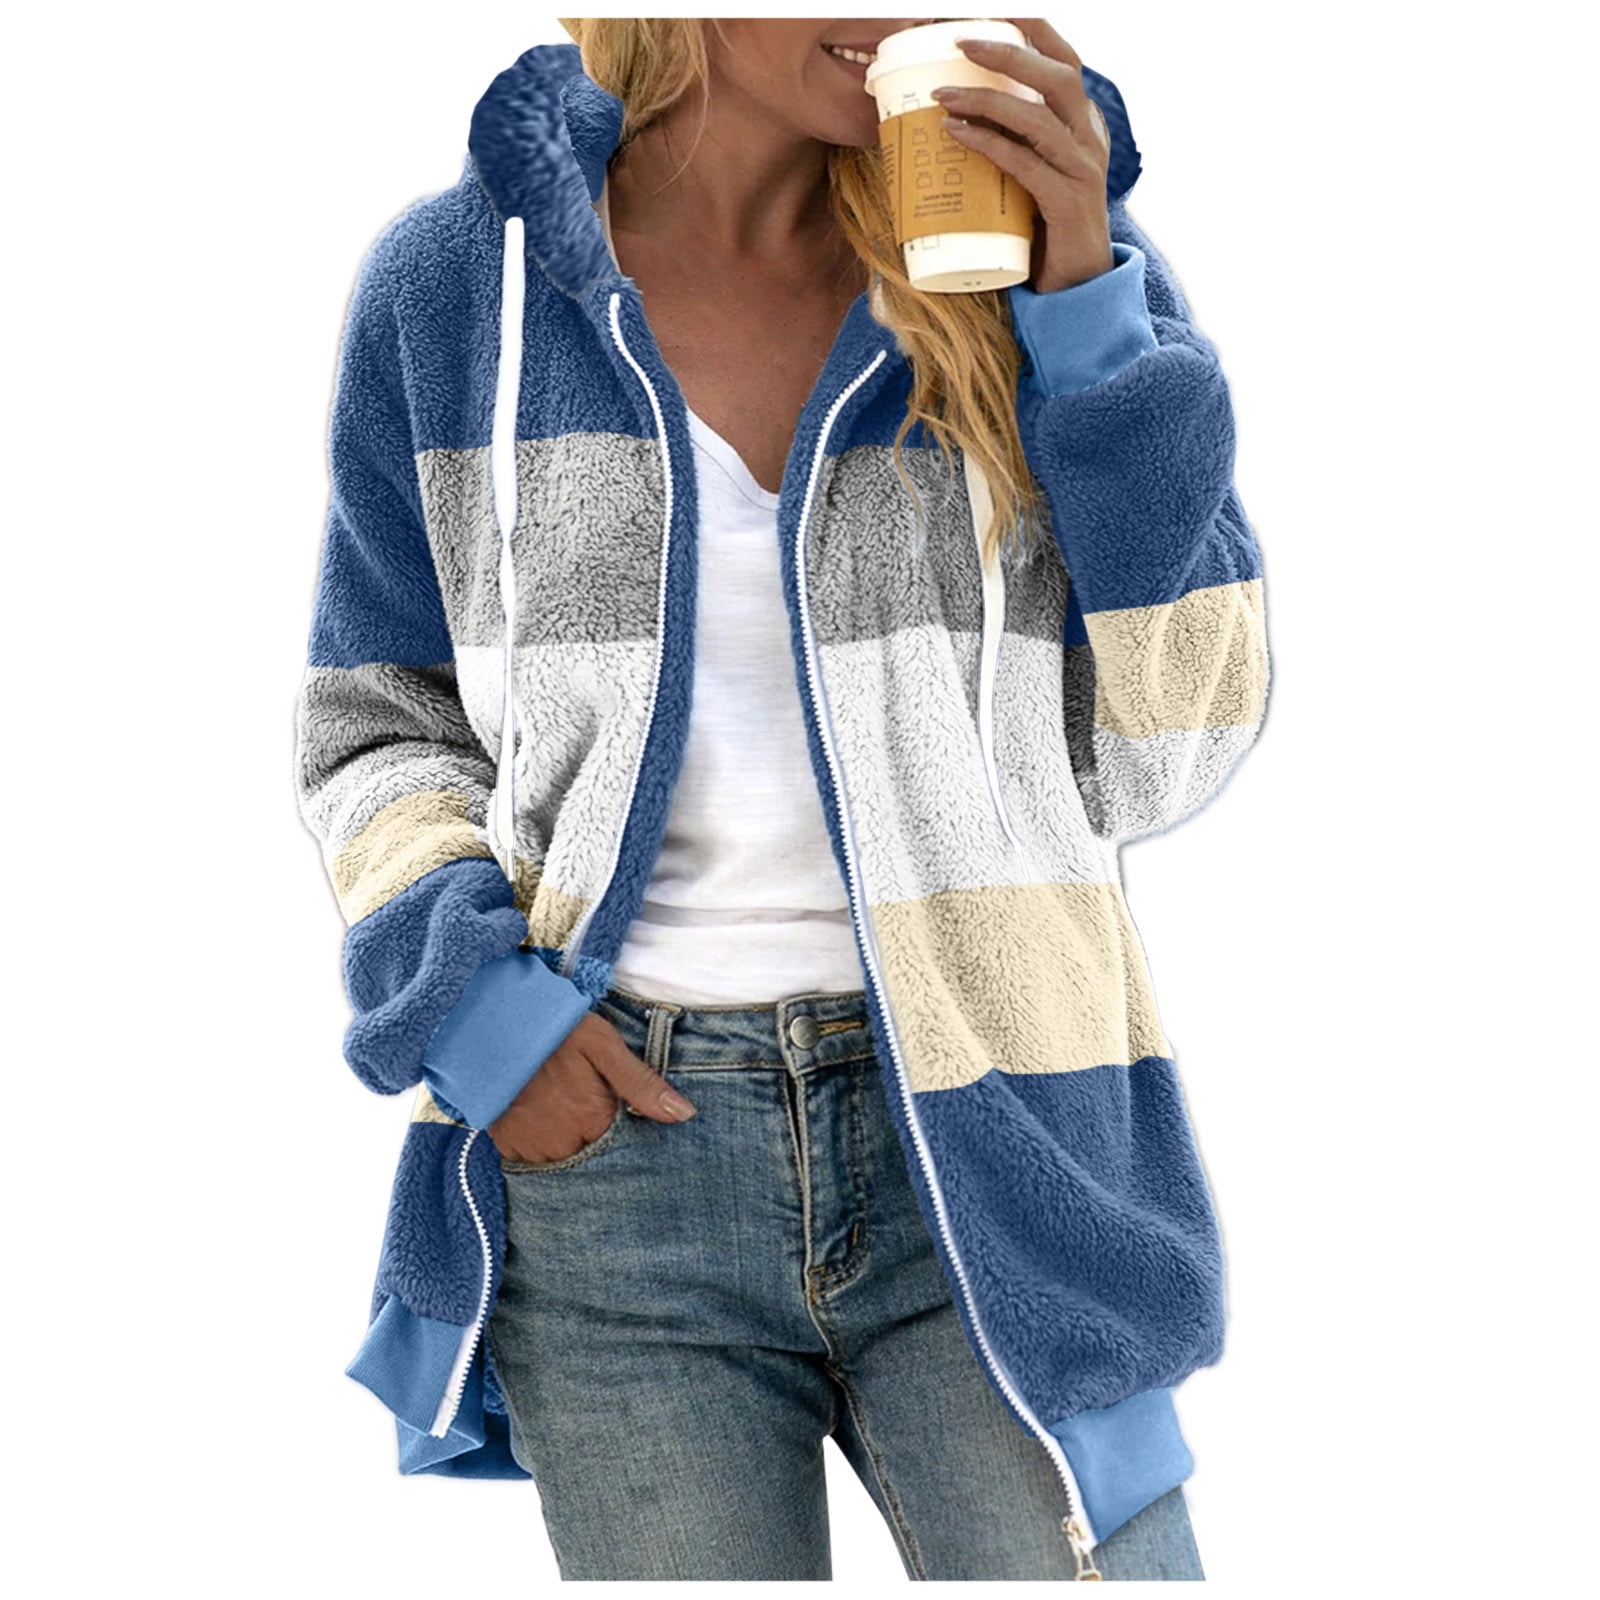 Women's Fashion Women Casual Comfortable Loose Crew Neck Hooded Solid Color  Casual Sweatshirt winter clothes for women 